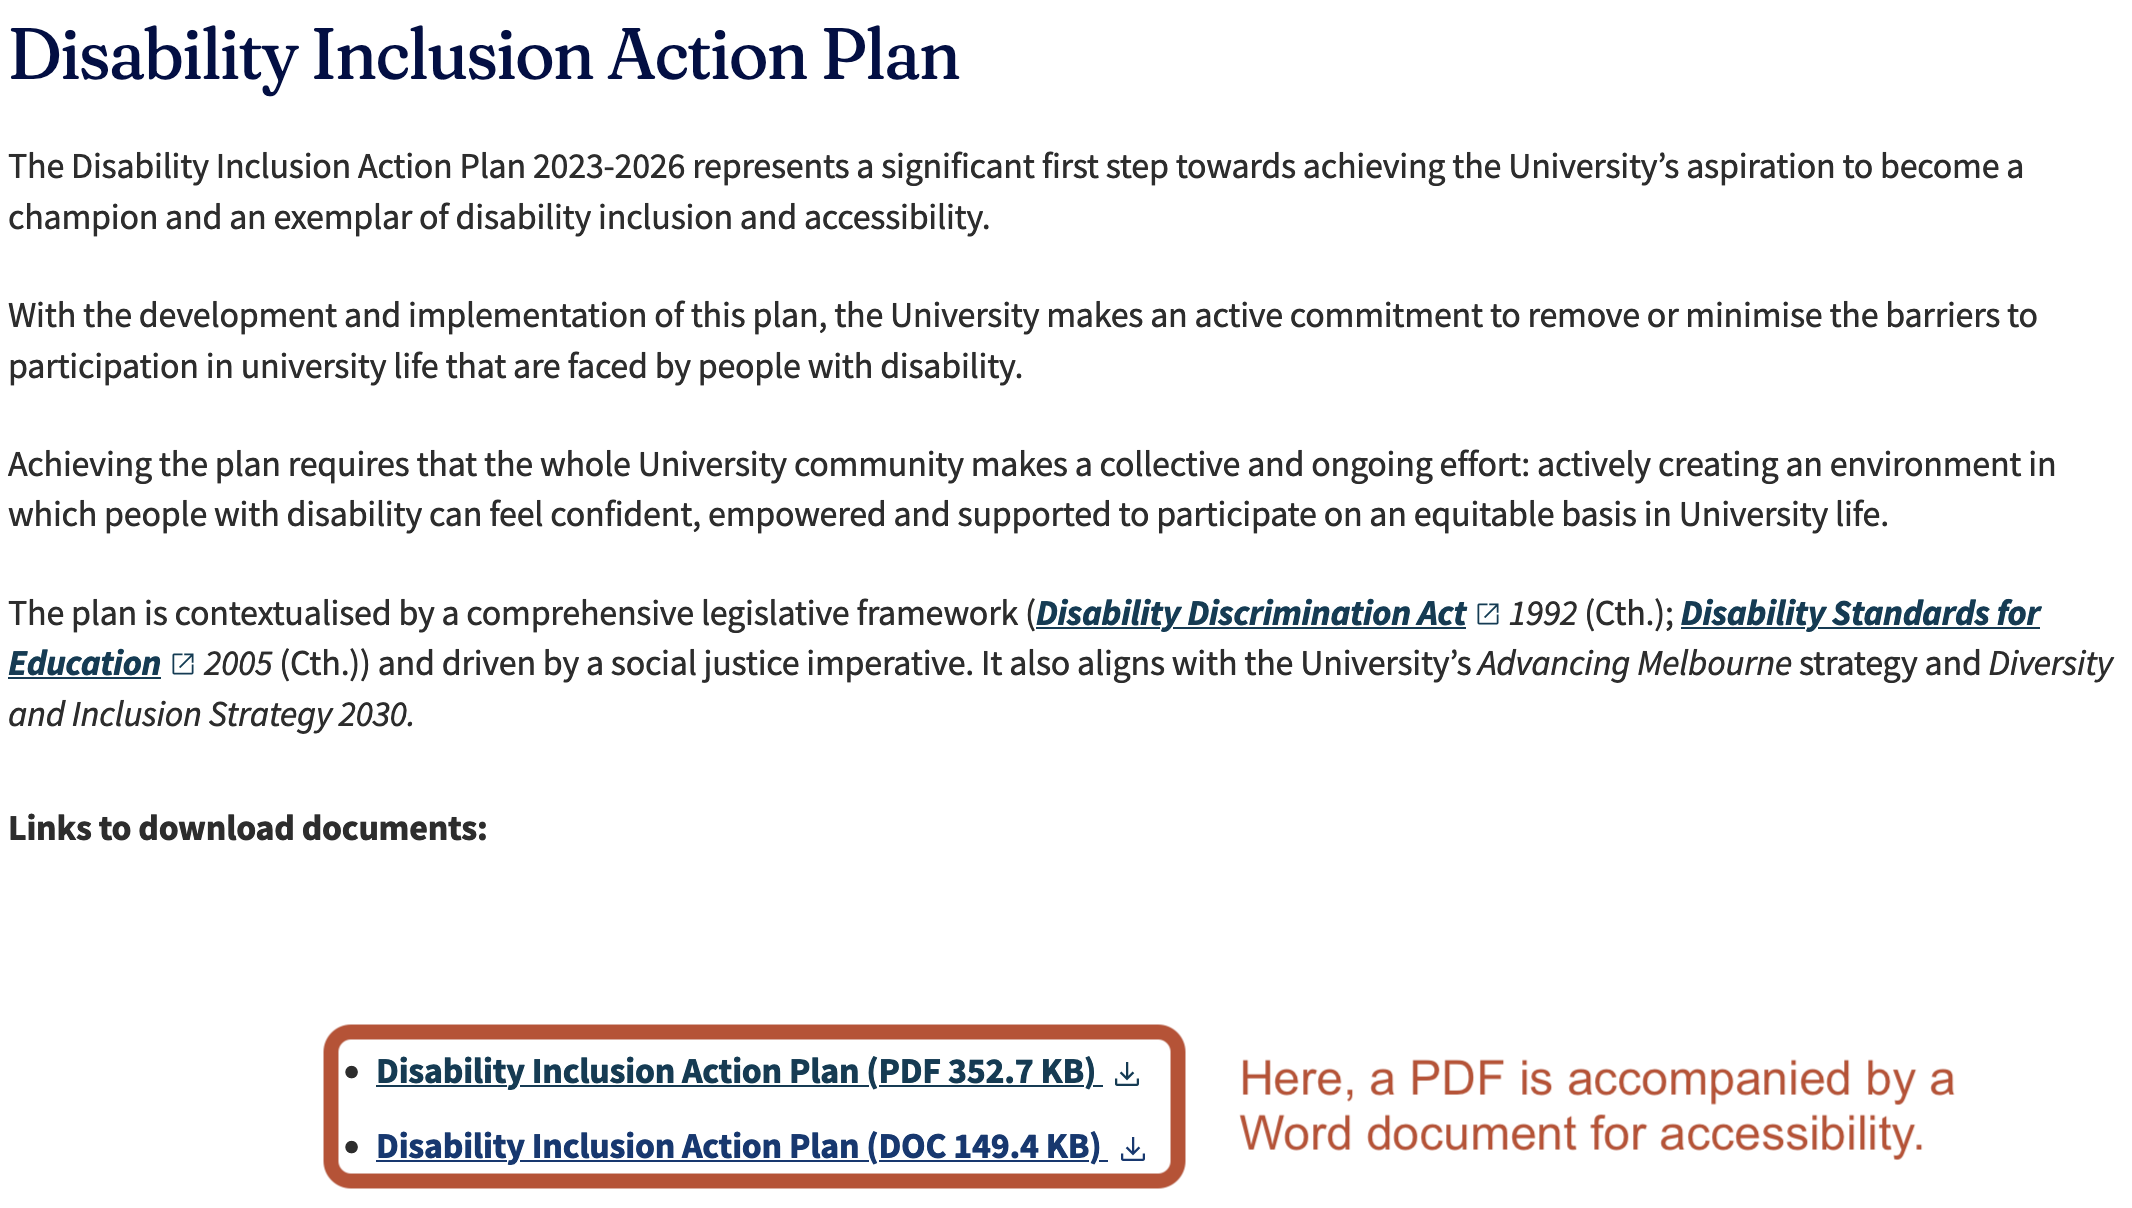 Screenshot of the website for the Disability Inclusion Action Plan, with links to both P.D.F and Word versions.